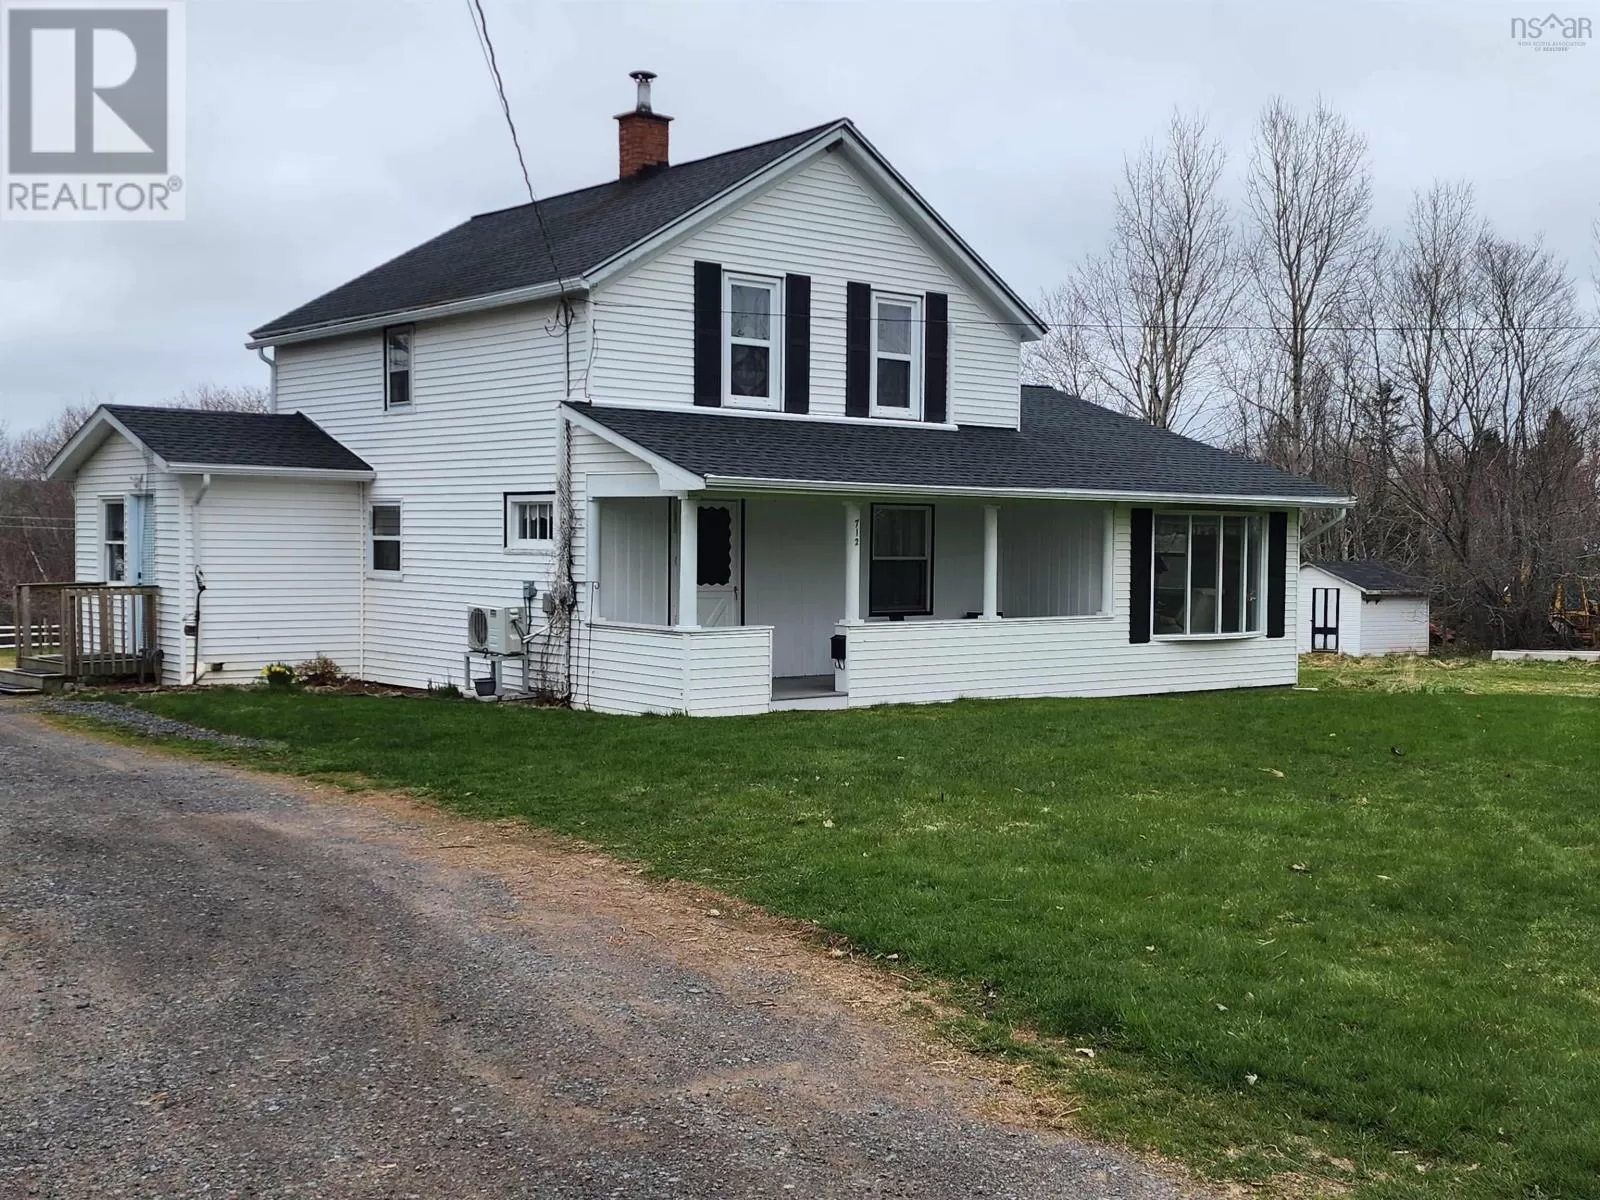 House for rent: 712 College Road, Bible Hill, Nova Scotia B2N 2R4